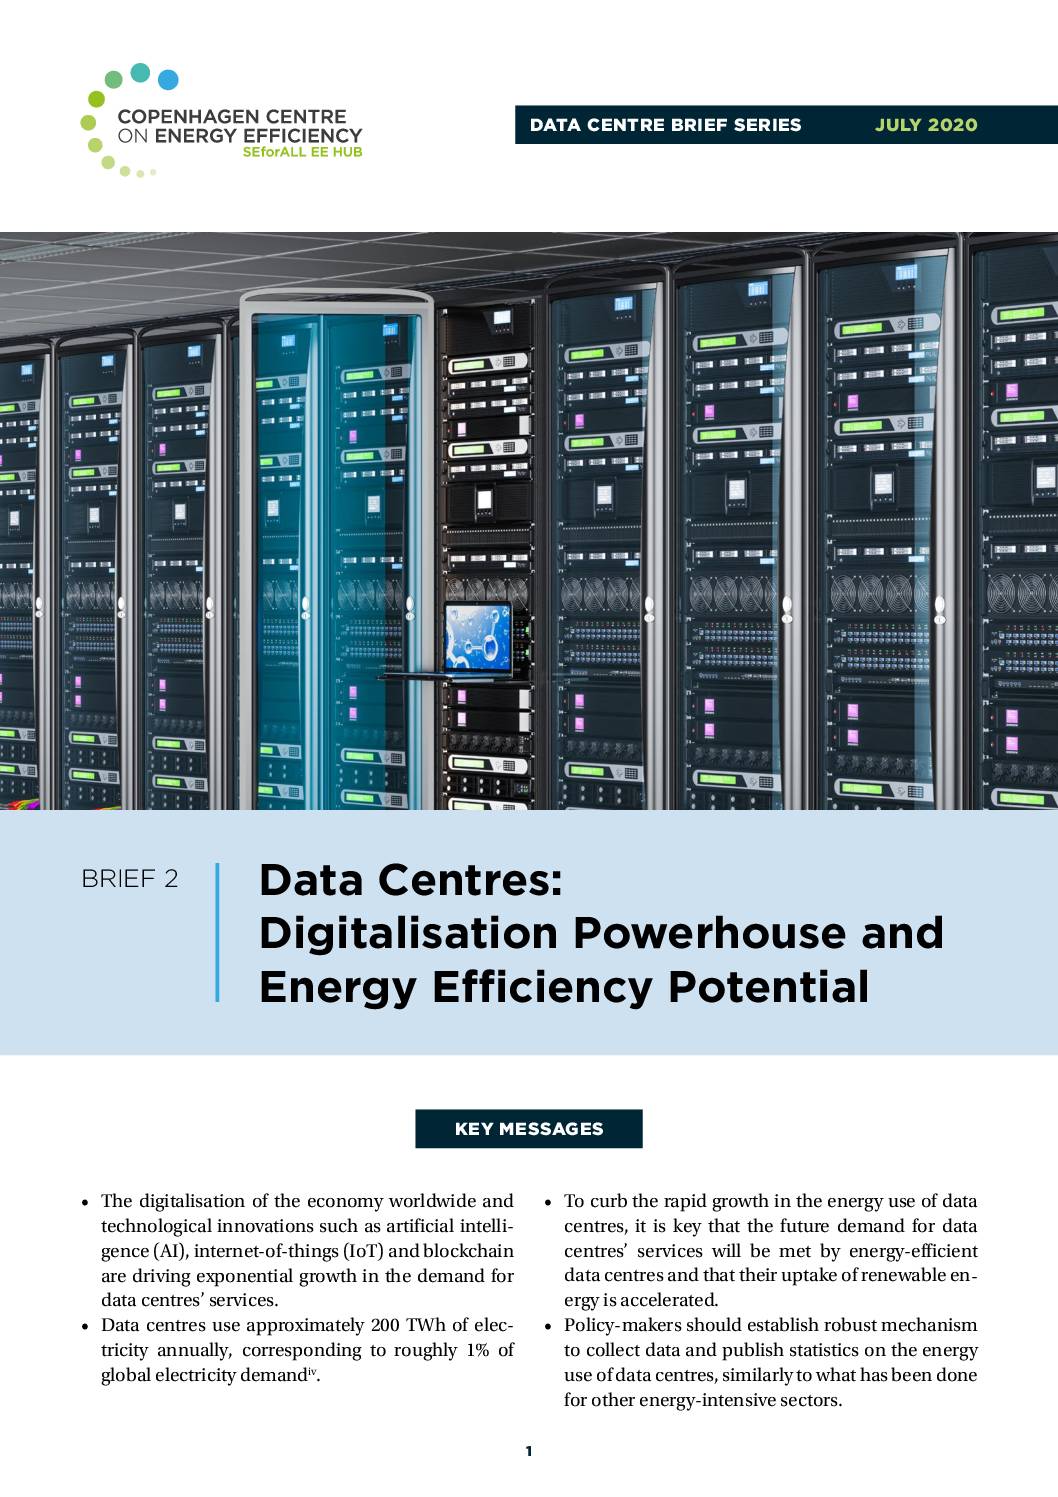 Data Centres: Digitalisation Powerhouse and Energy Efficiency Potential